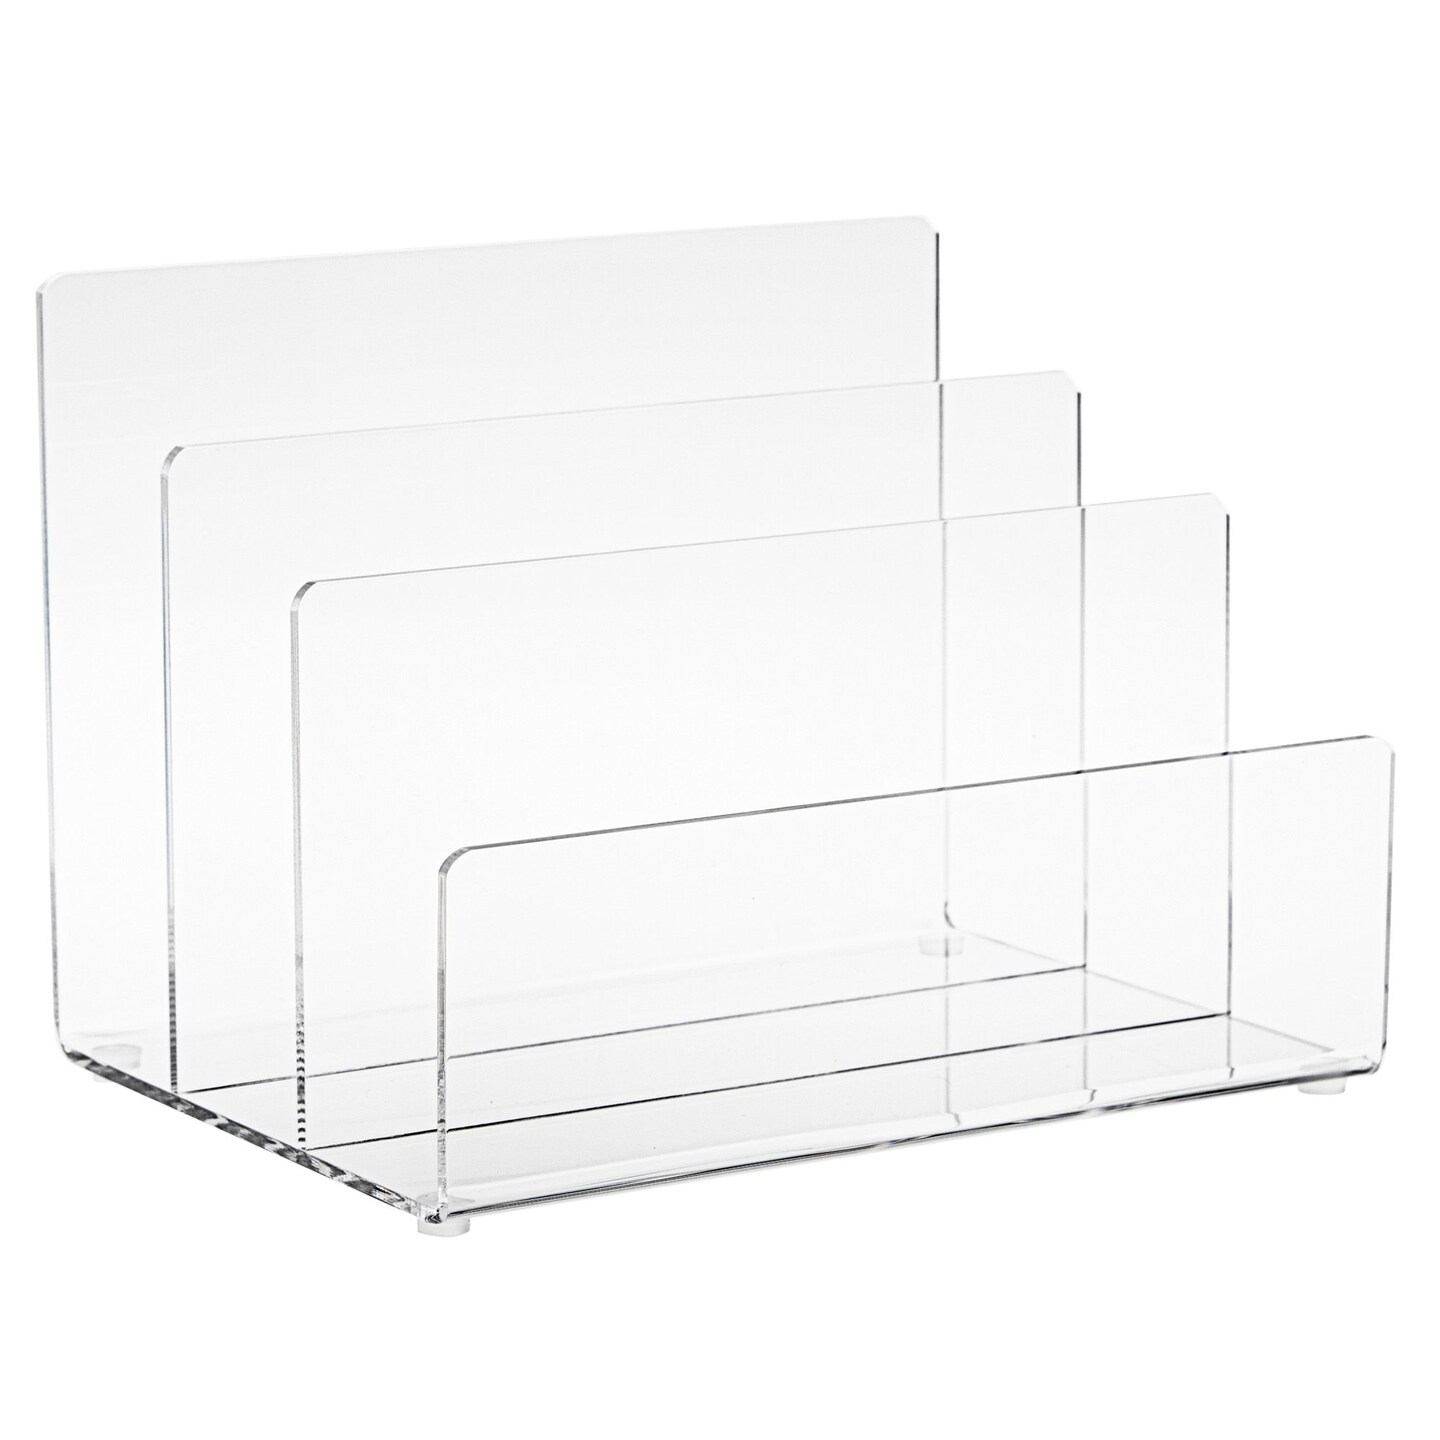 Clear Acrylic Folder Holder with 3 Sections and Rounded Edges for Paper Files, Documents, Envelopes, Desk Organizer for School and Office Supplies (9 x 6.75 x 6.6 In)